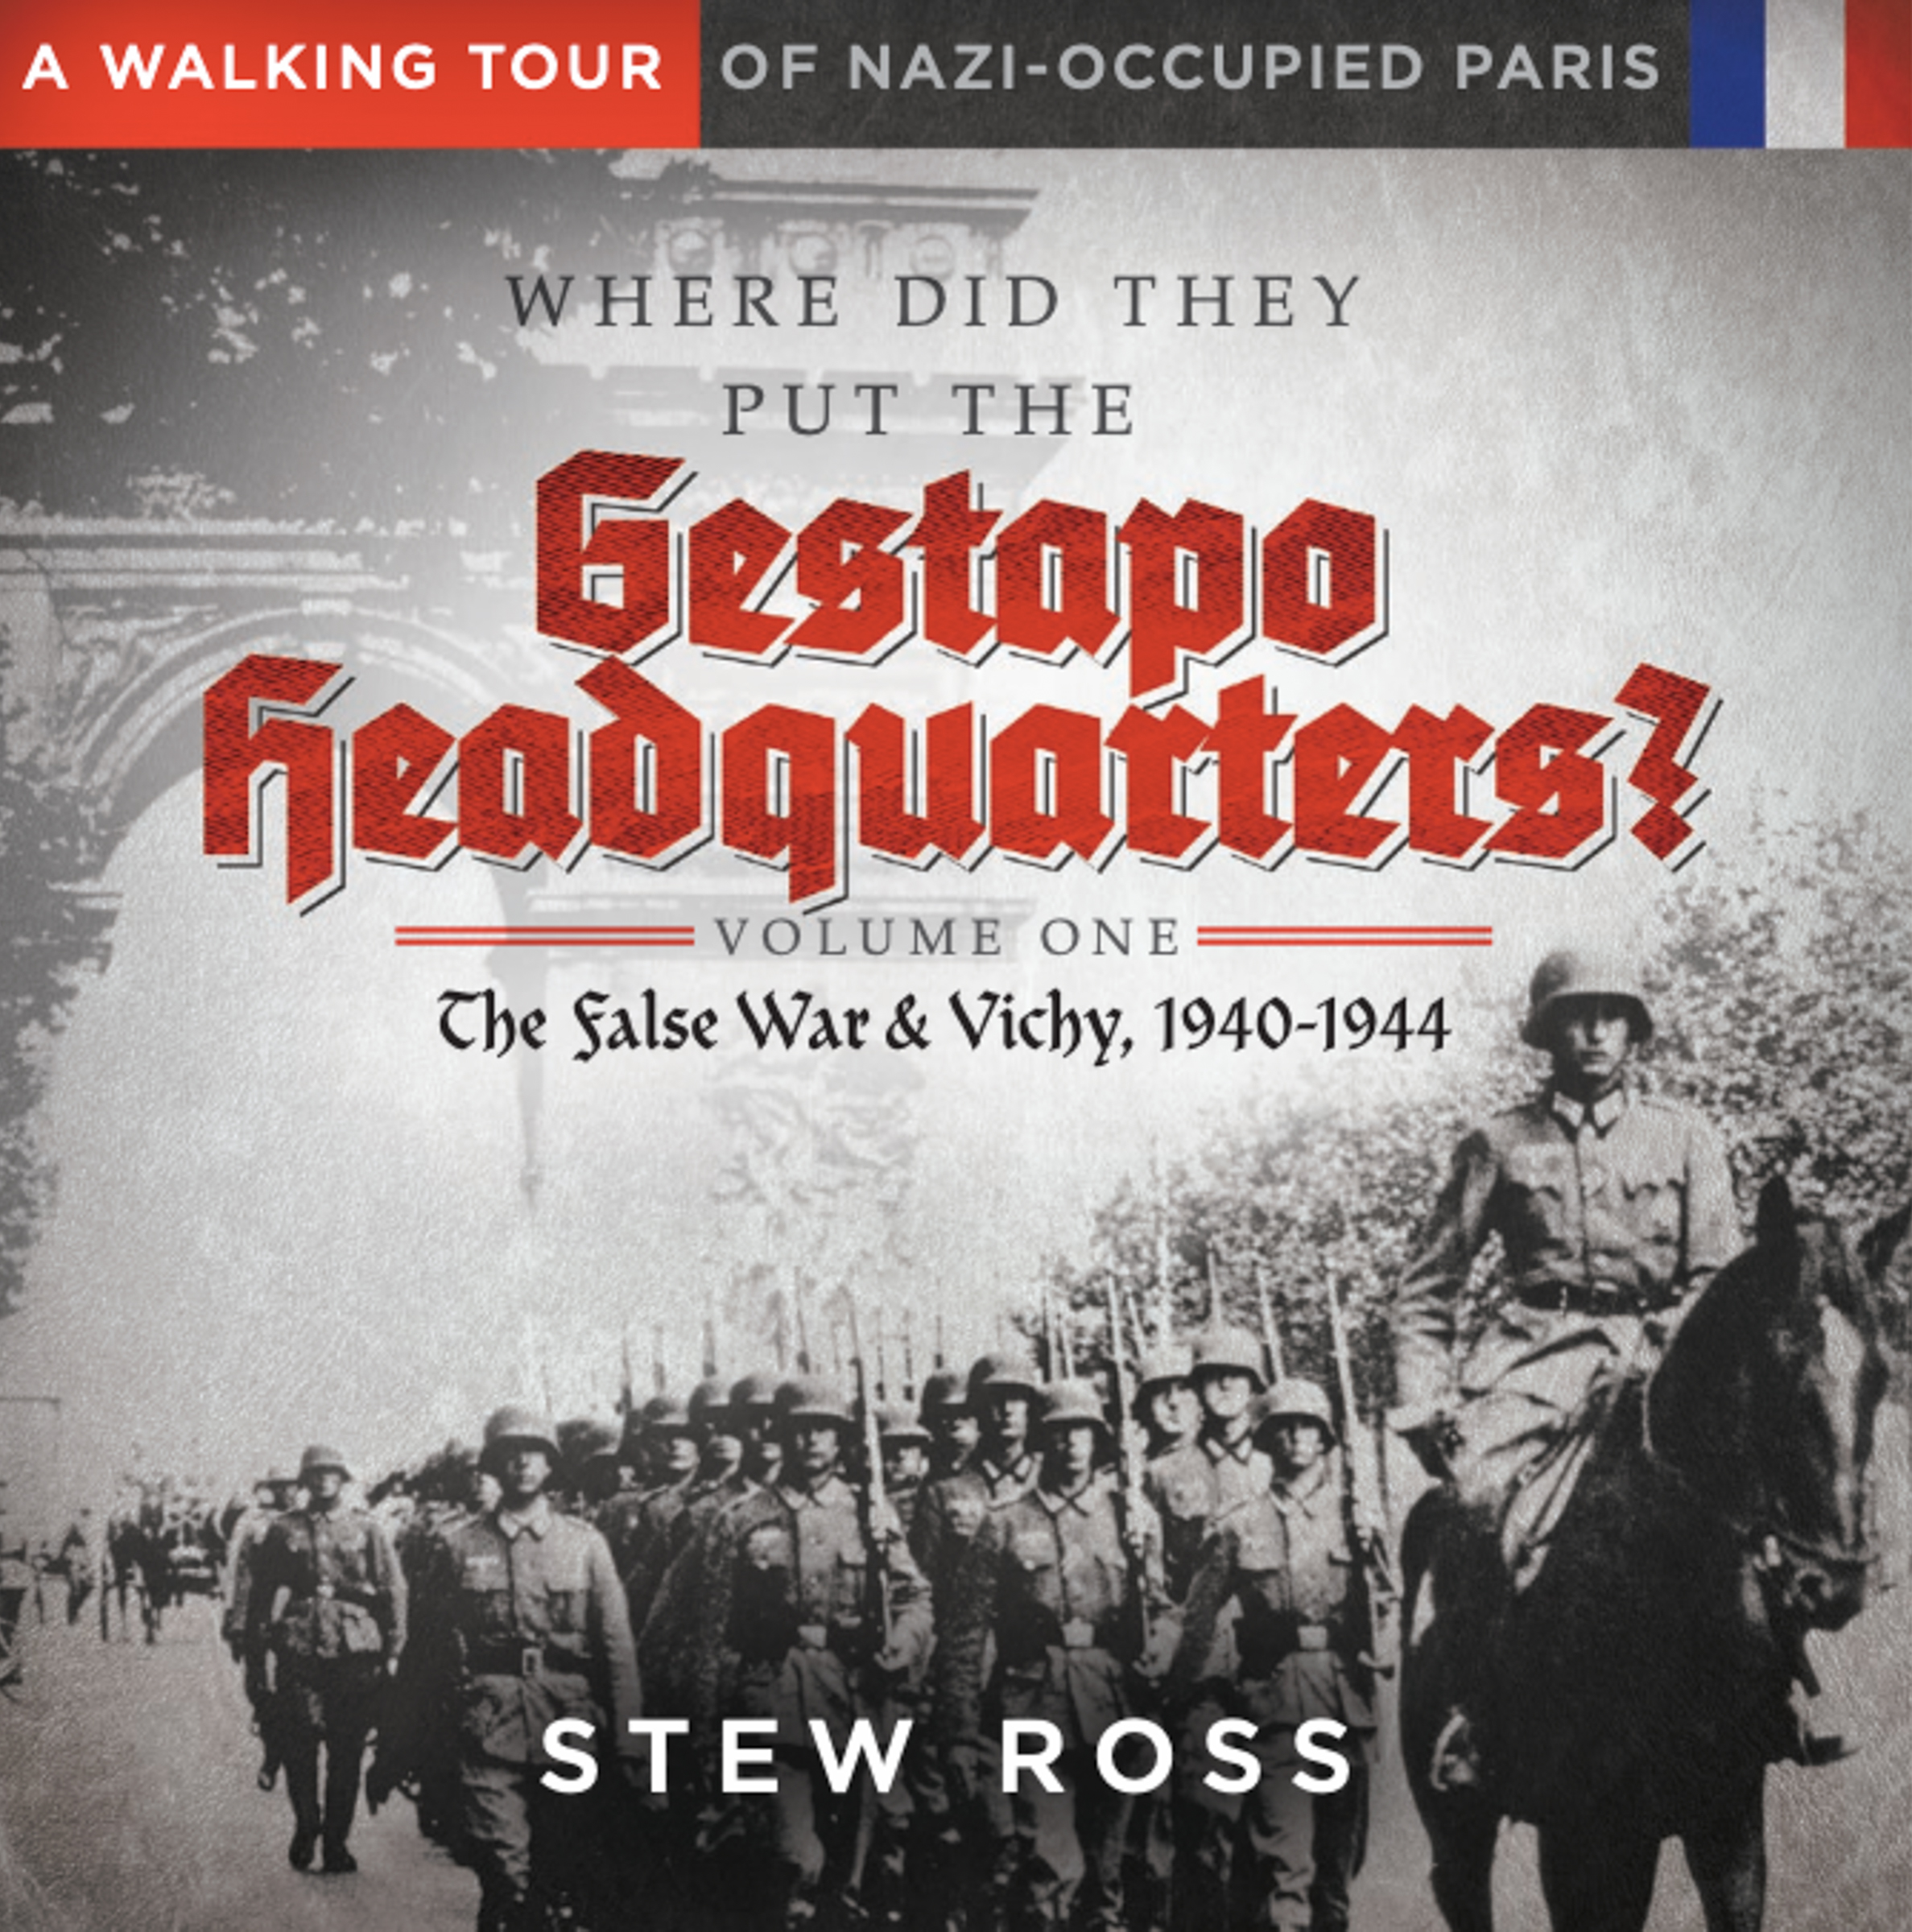 Where Did They Put the Gestapo Headquarters? A Walking Tour of Nazi Occupied Paris 1940-1944.